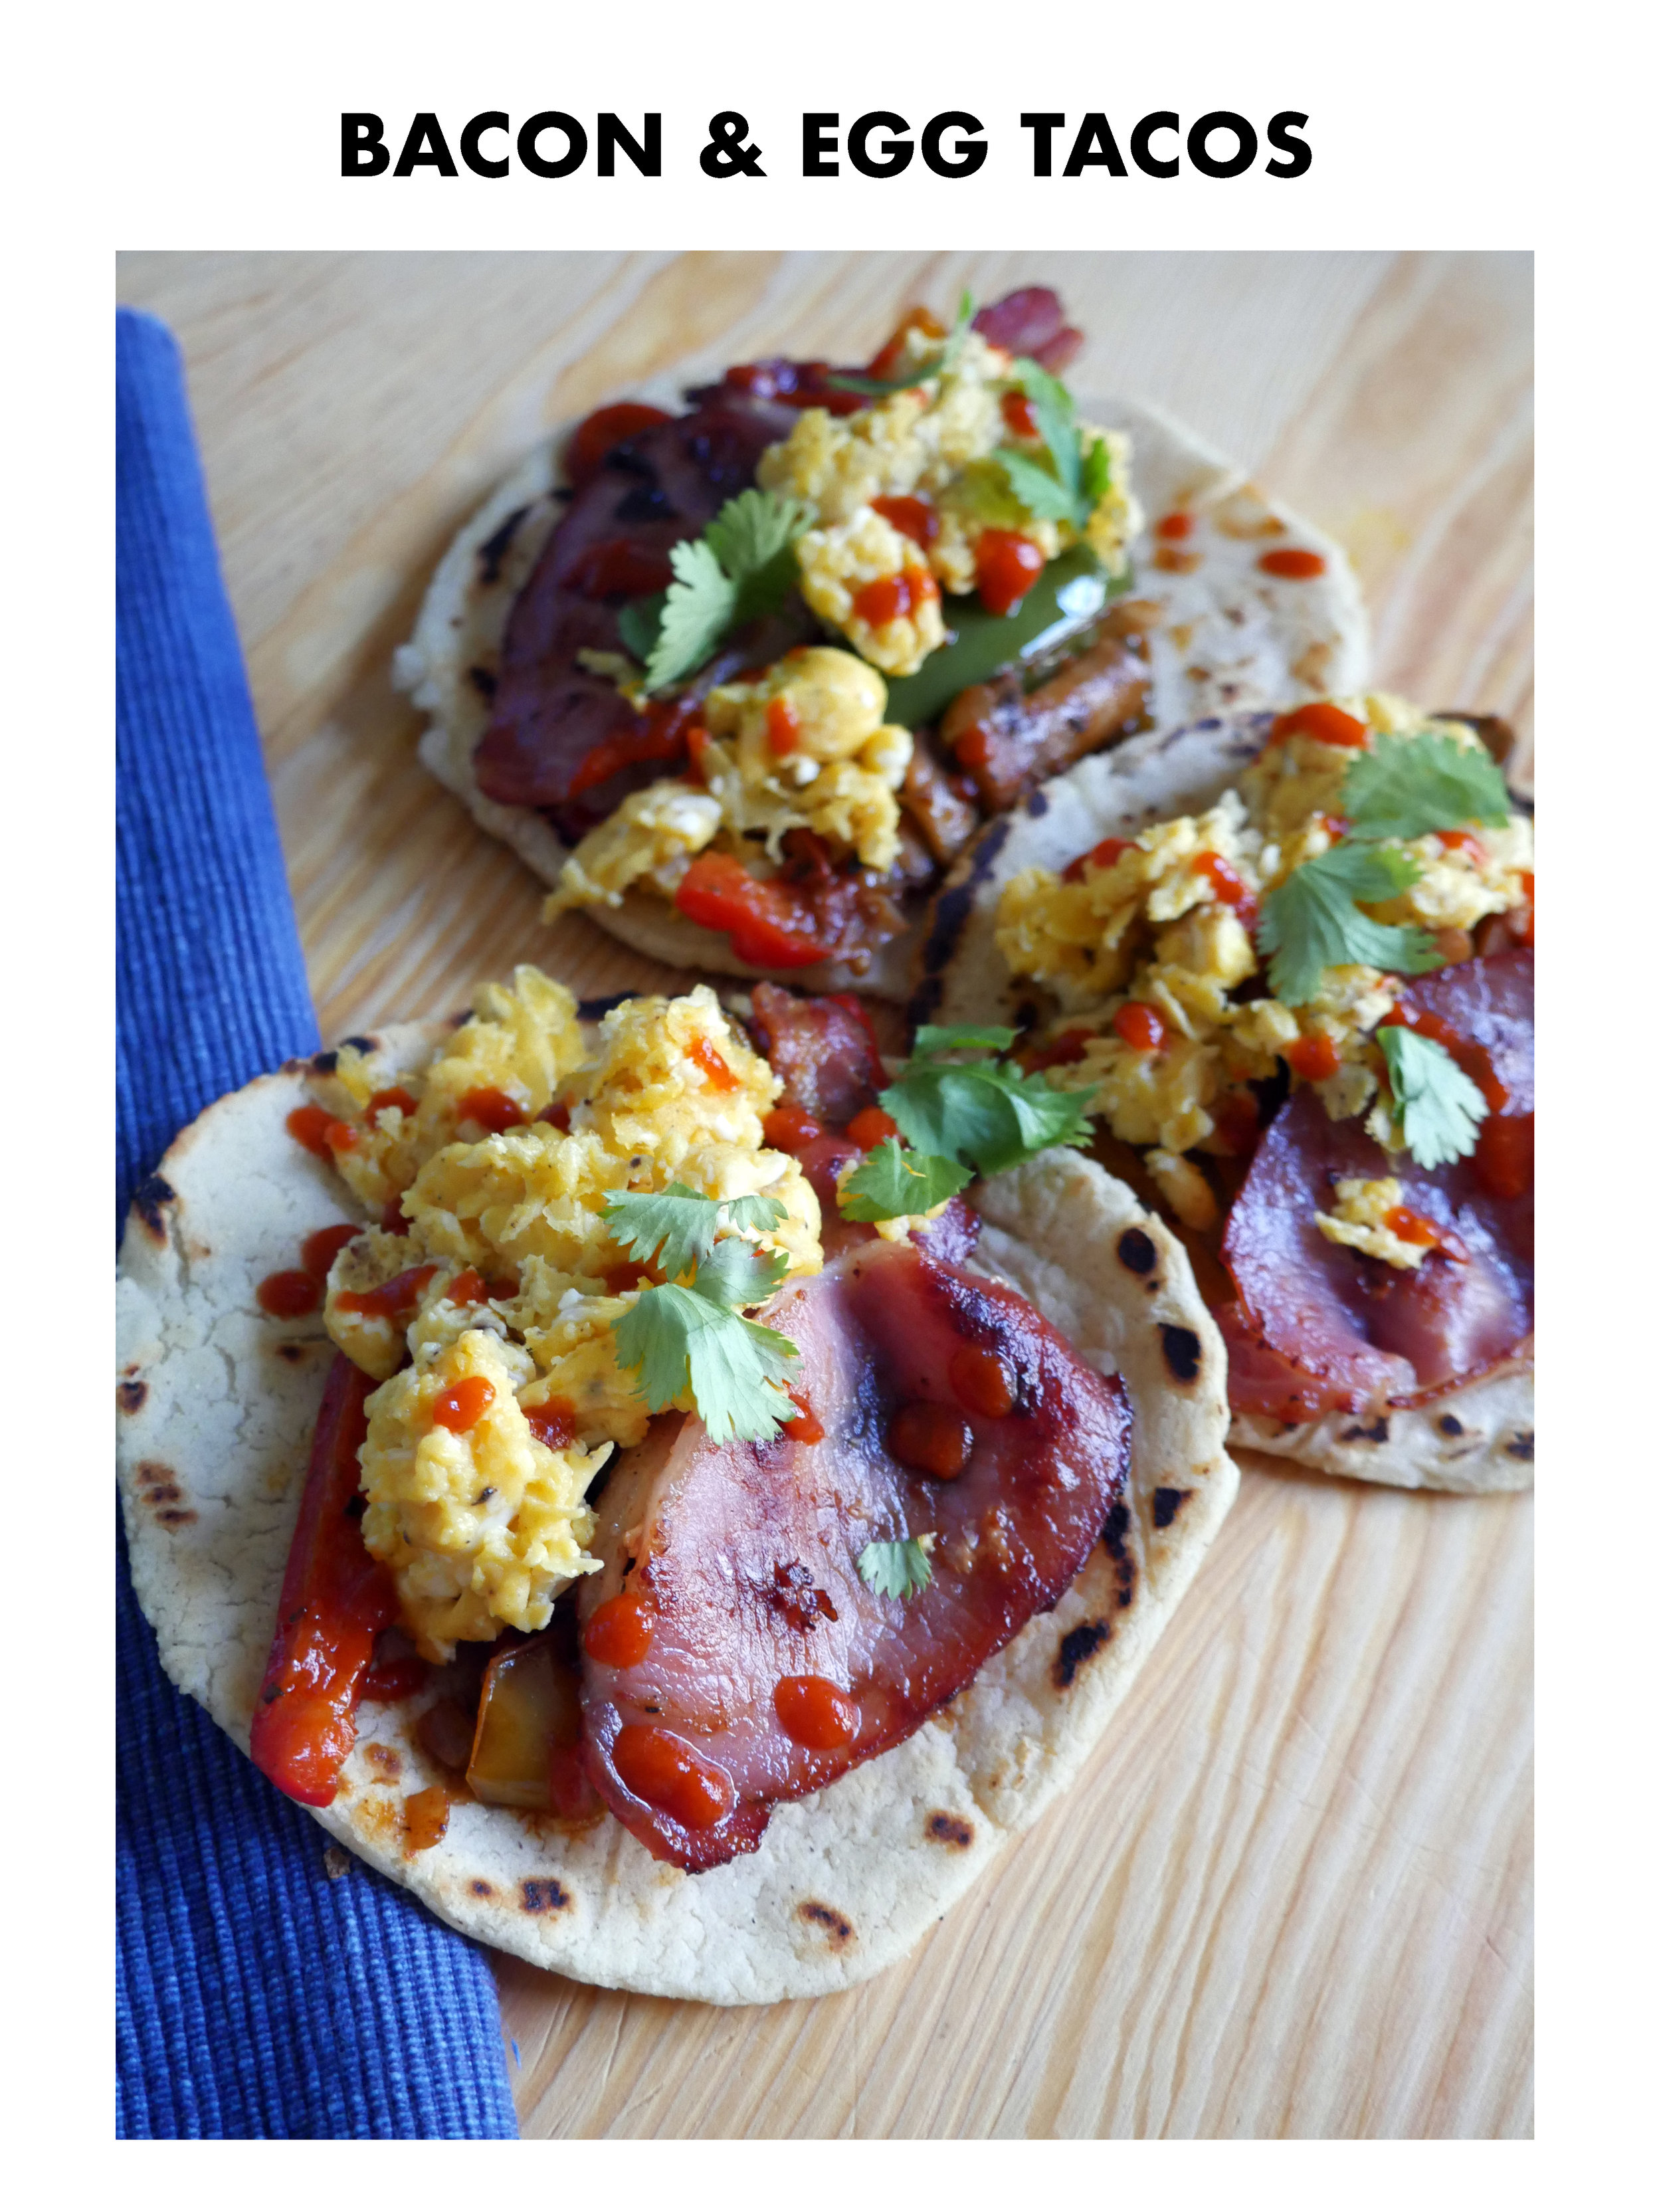 BACON AND EGG TACOS.jpg